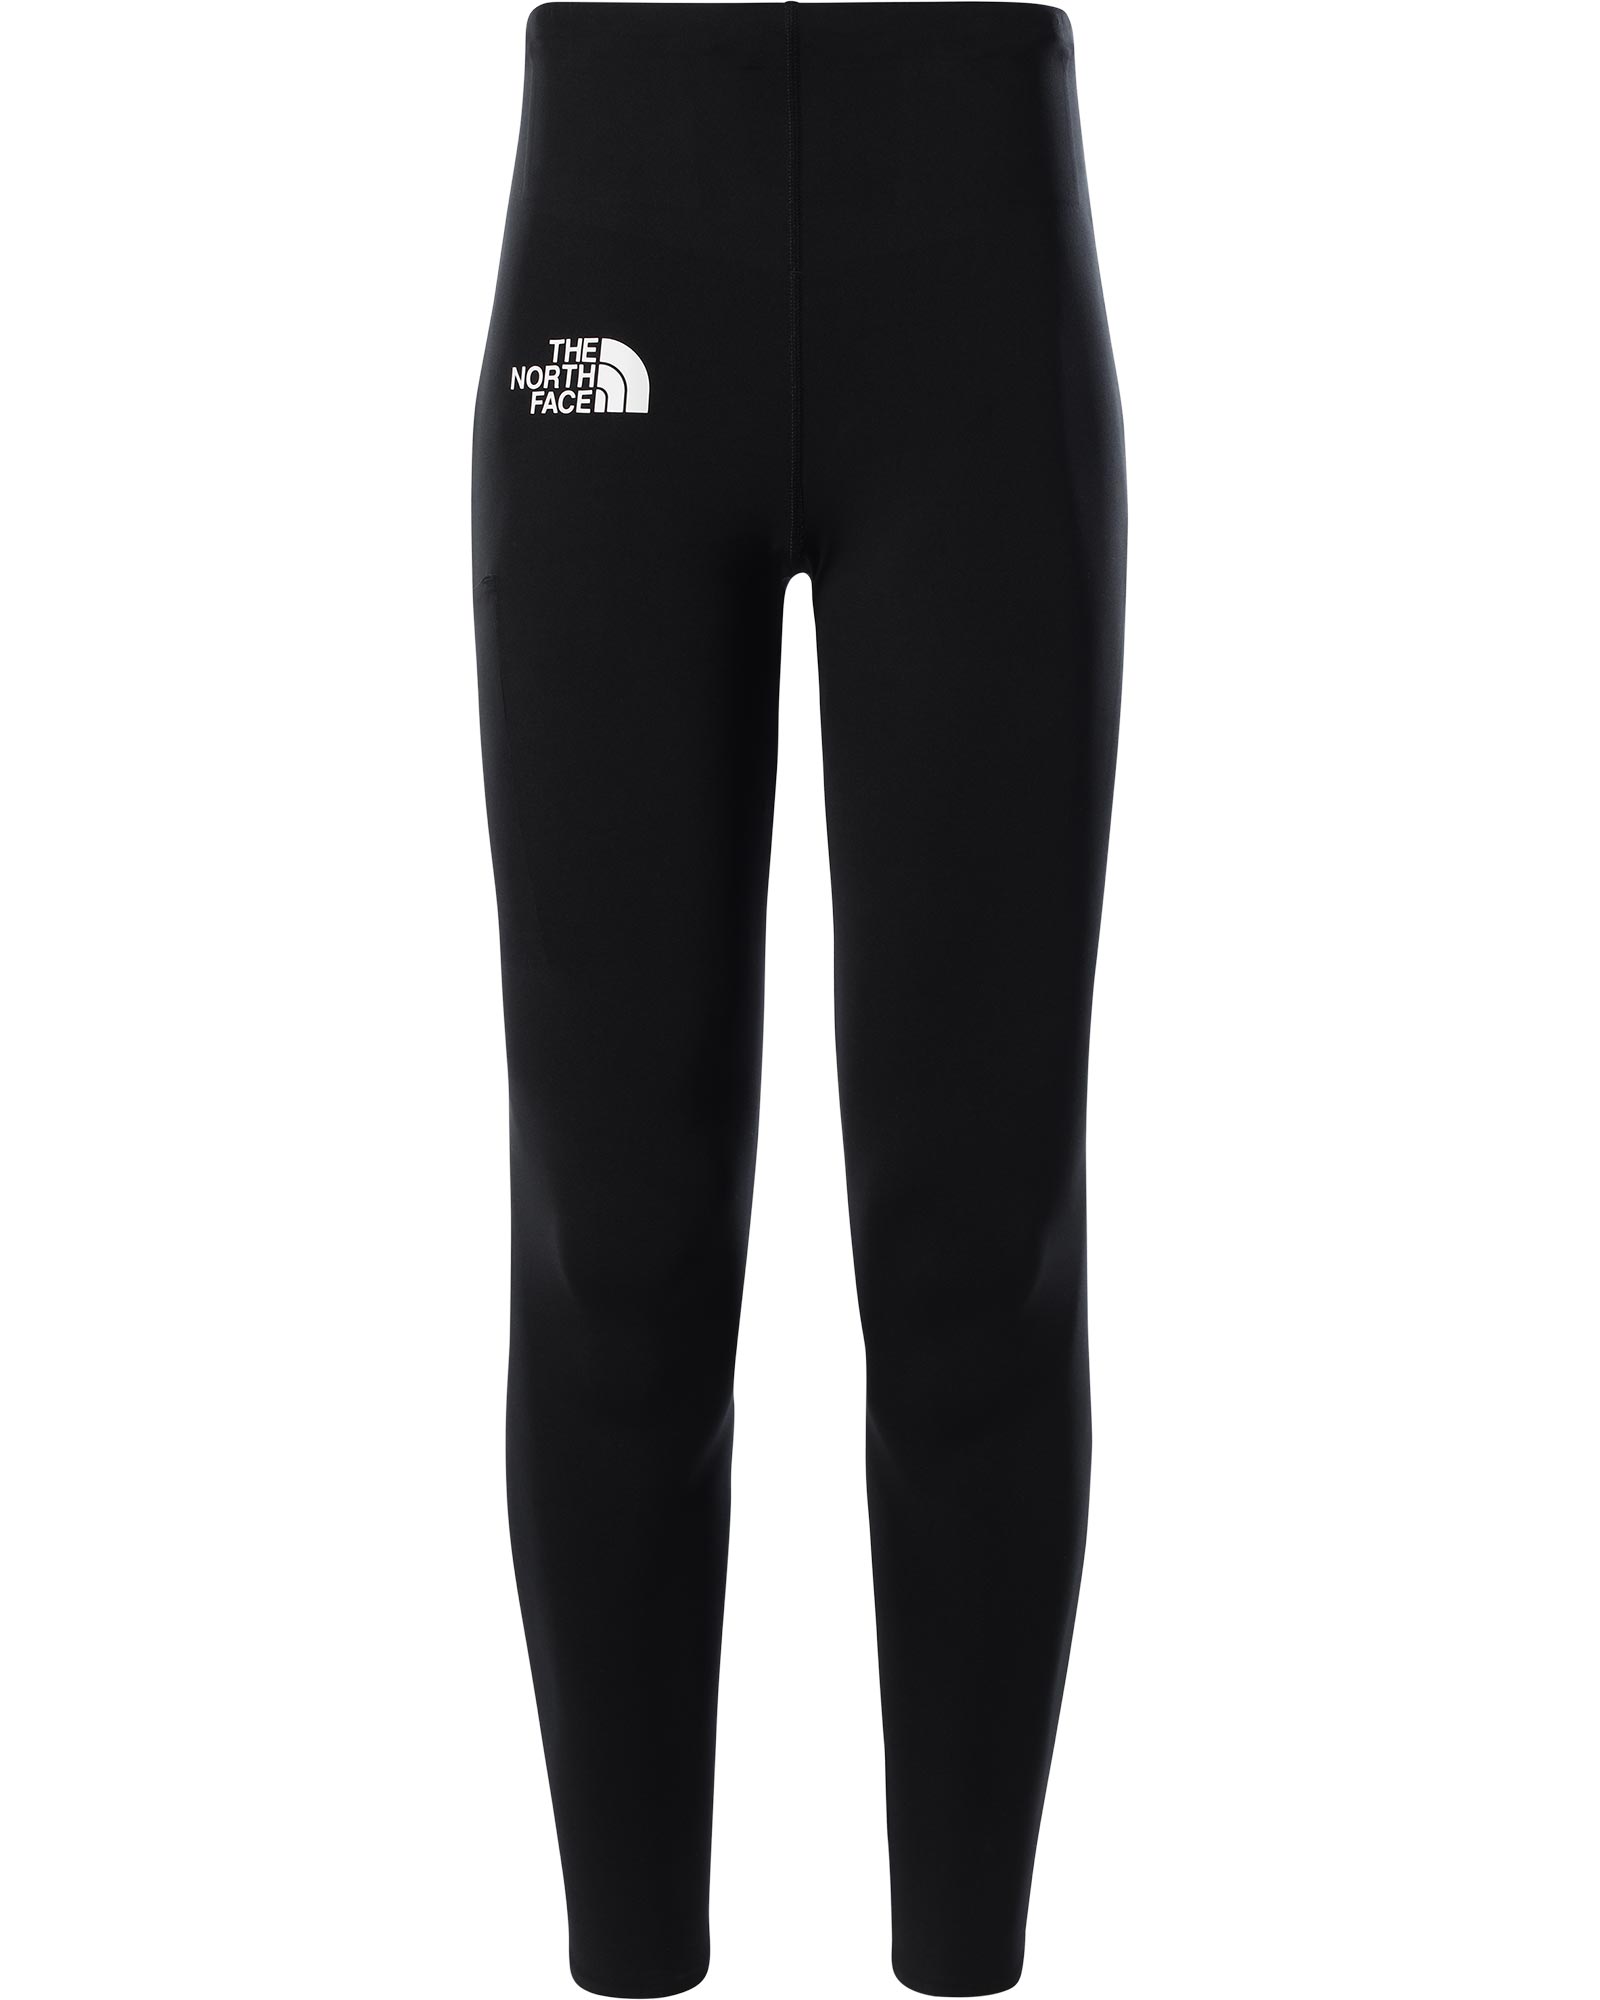 The North Face Flight Stridelight Womens Tights